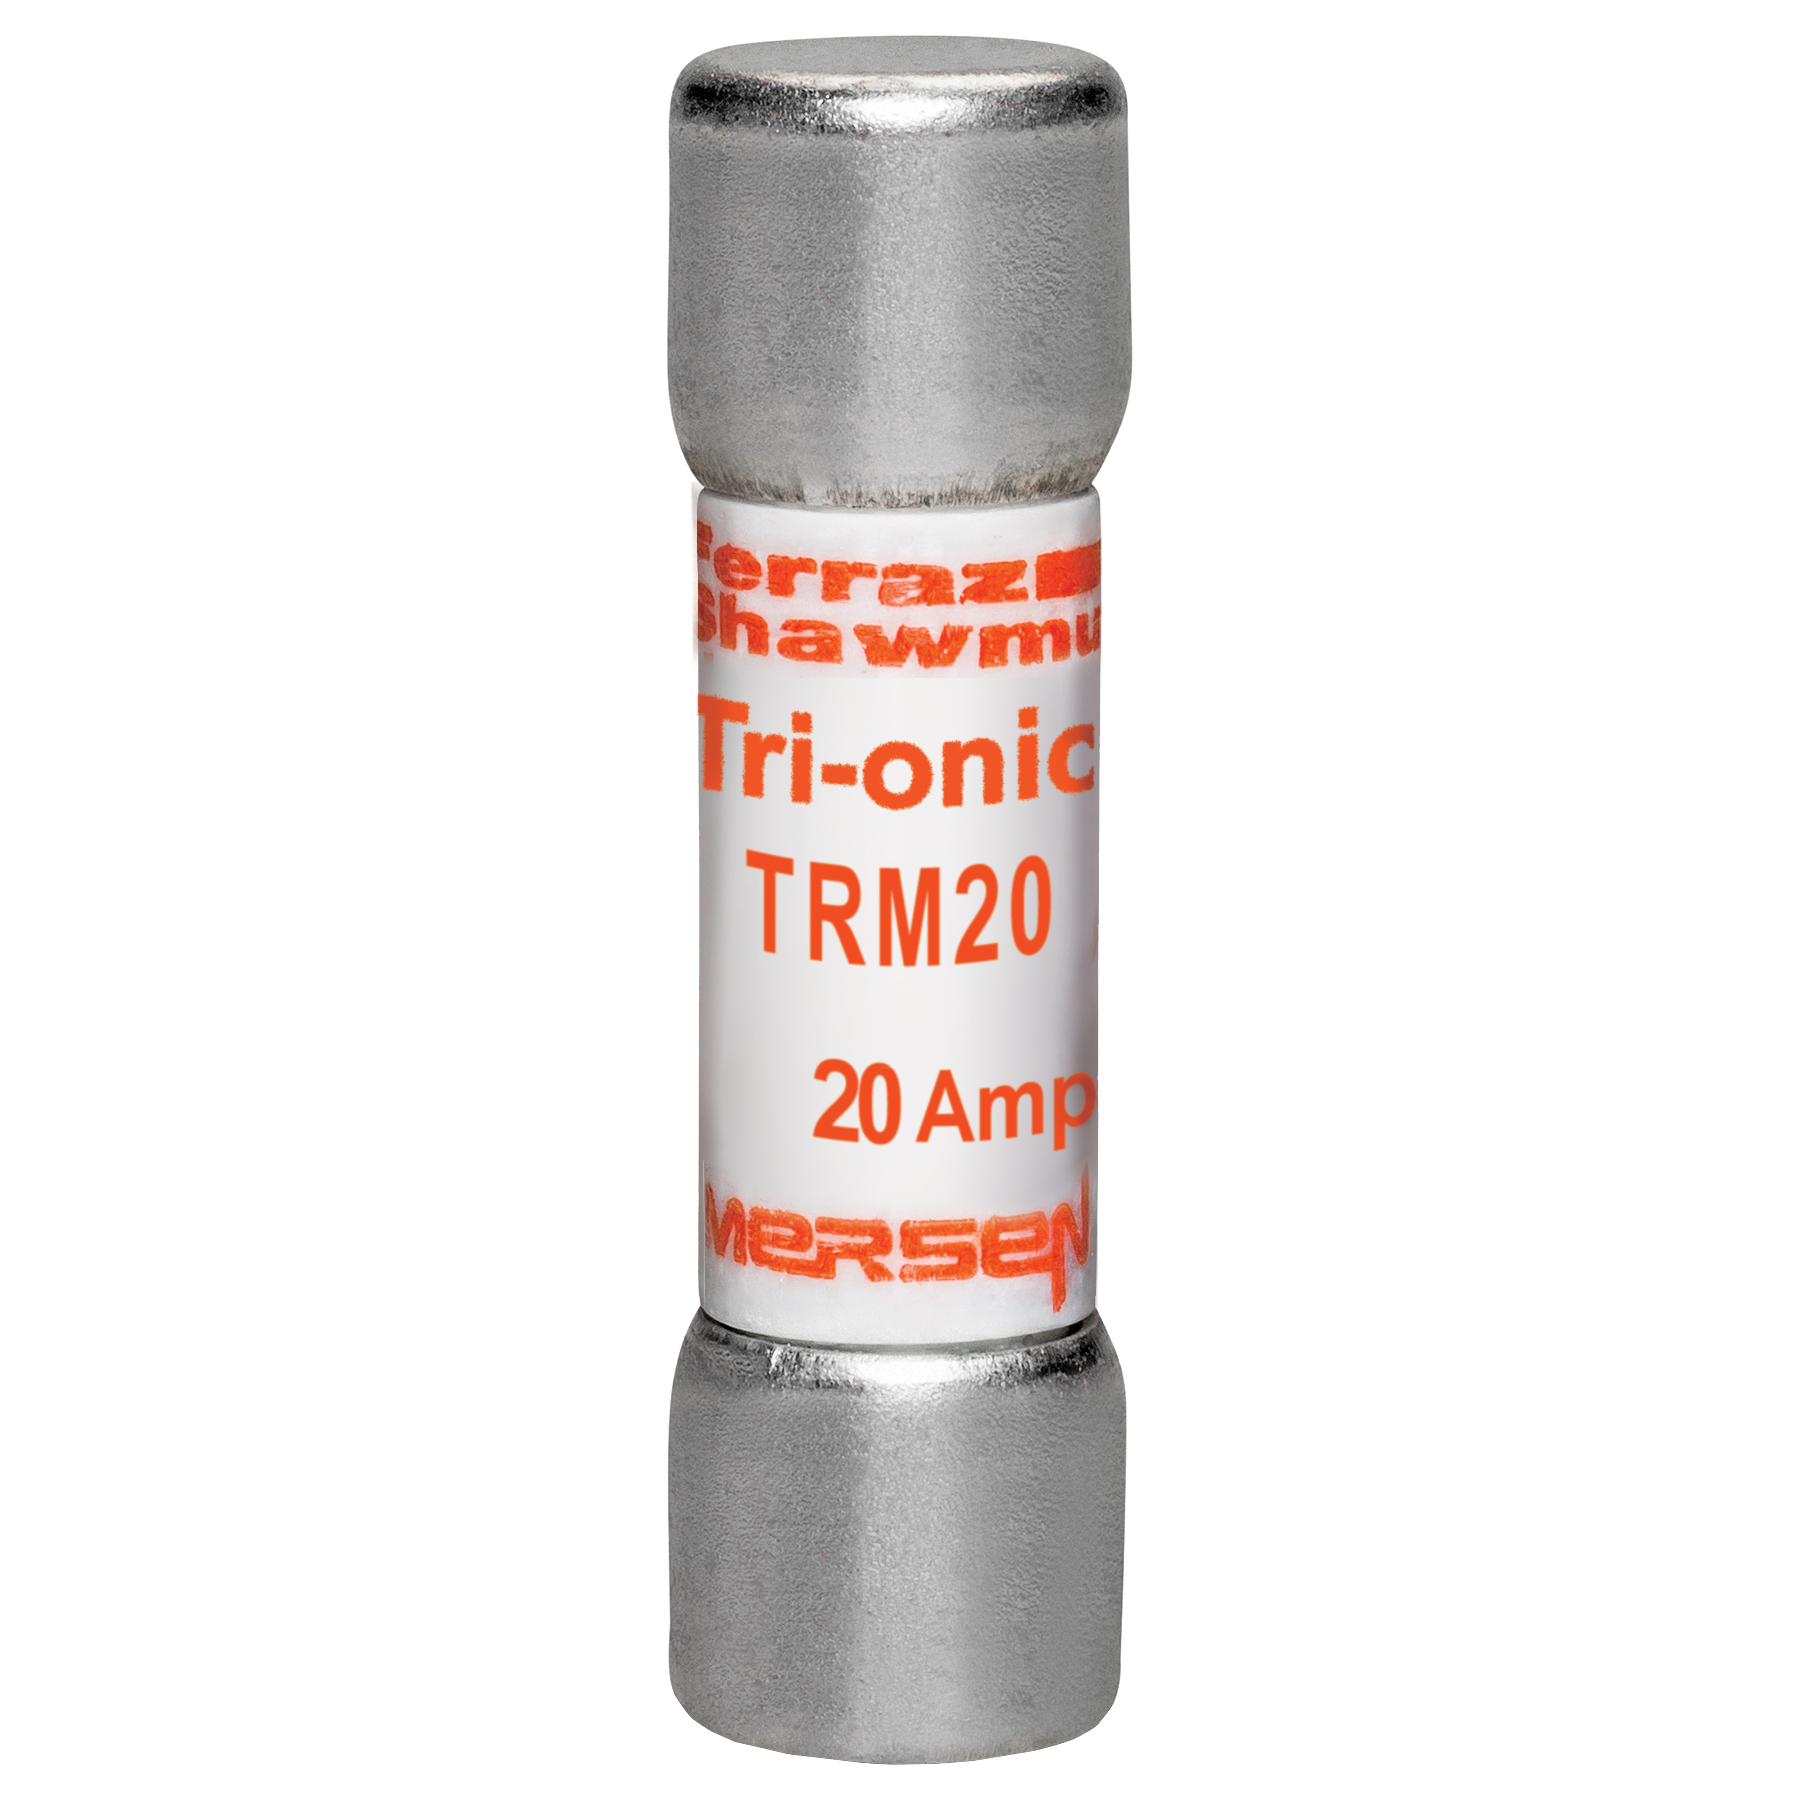 the part number is TRM20